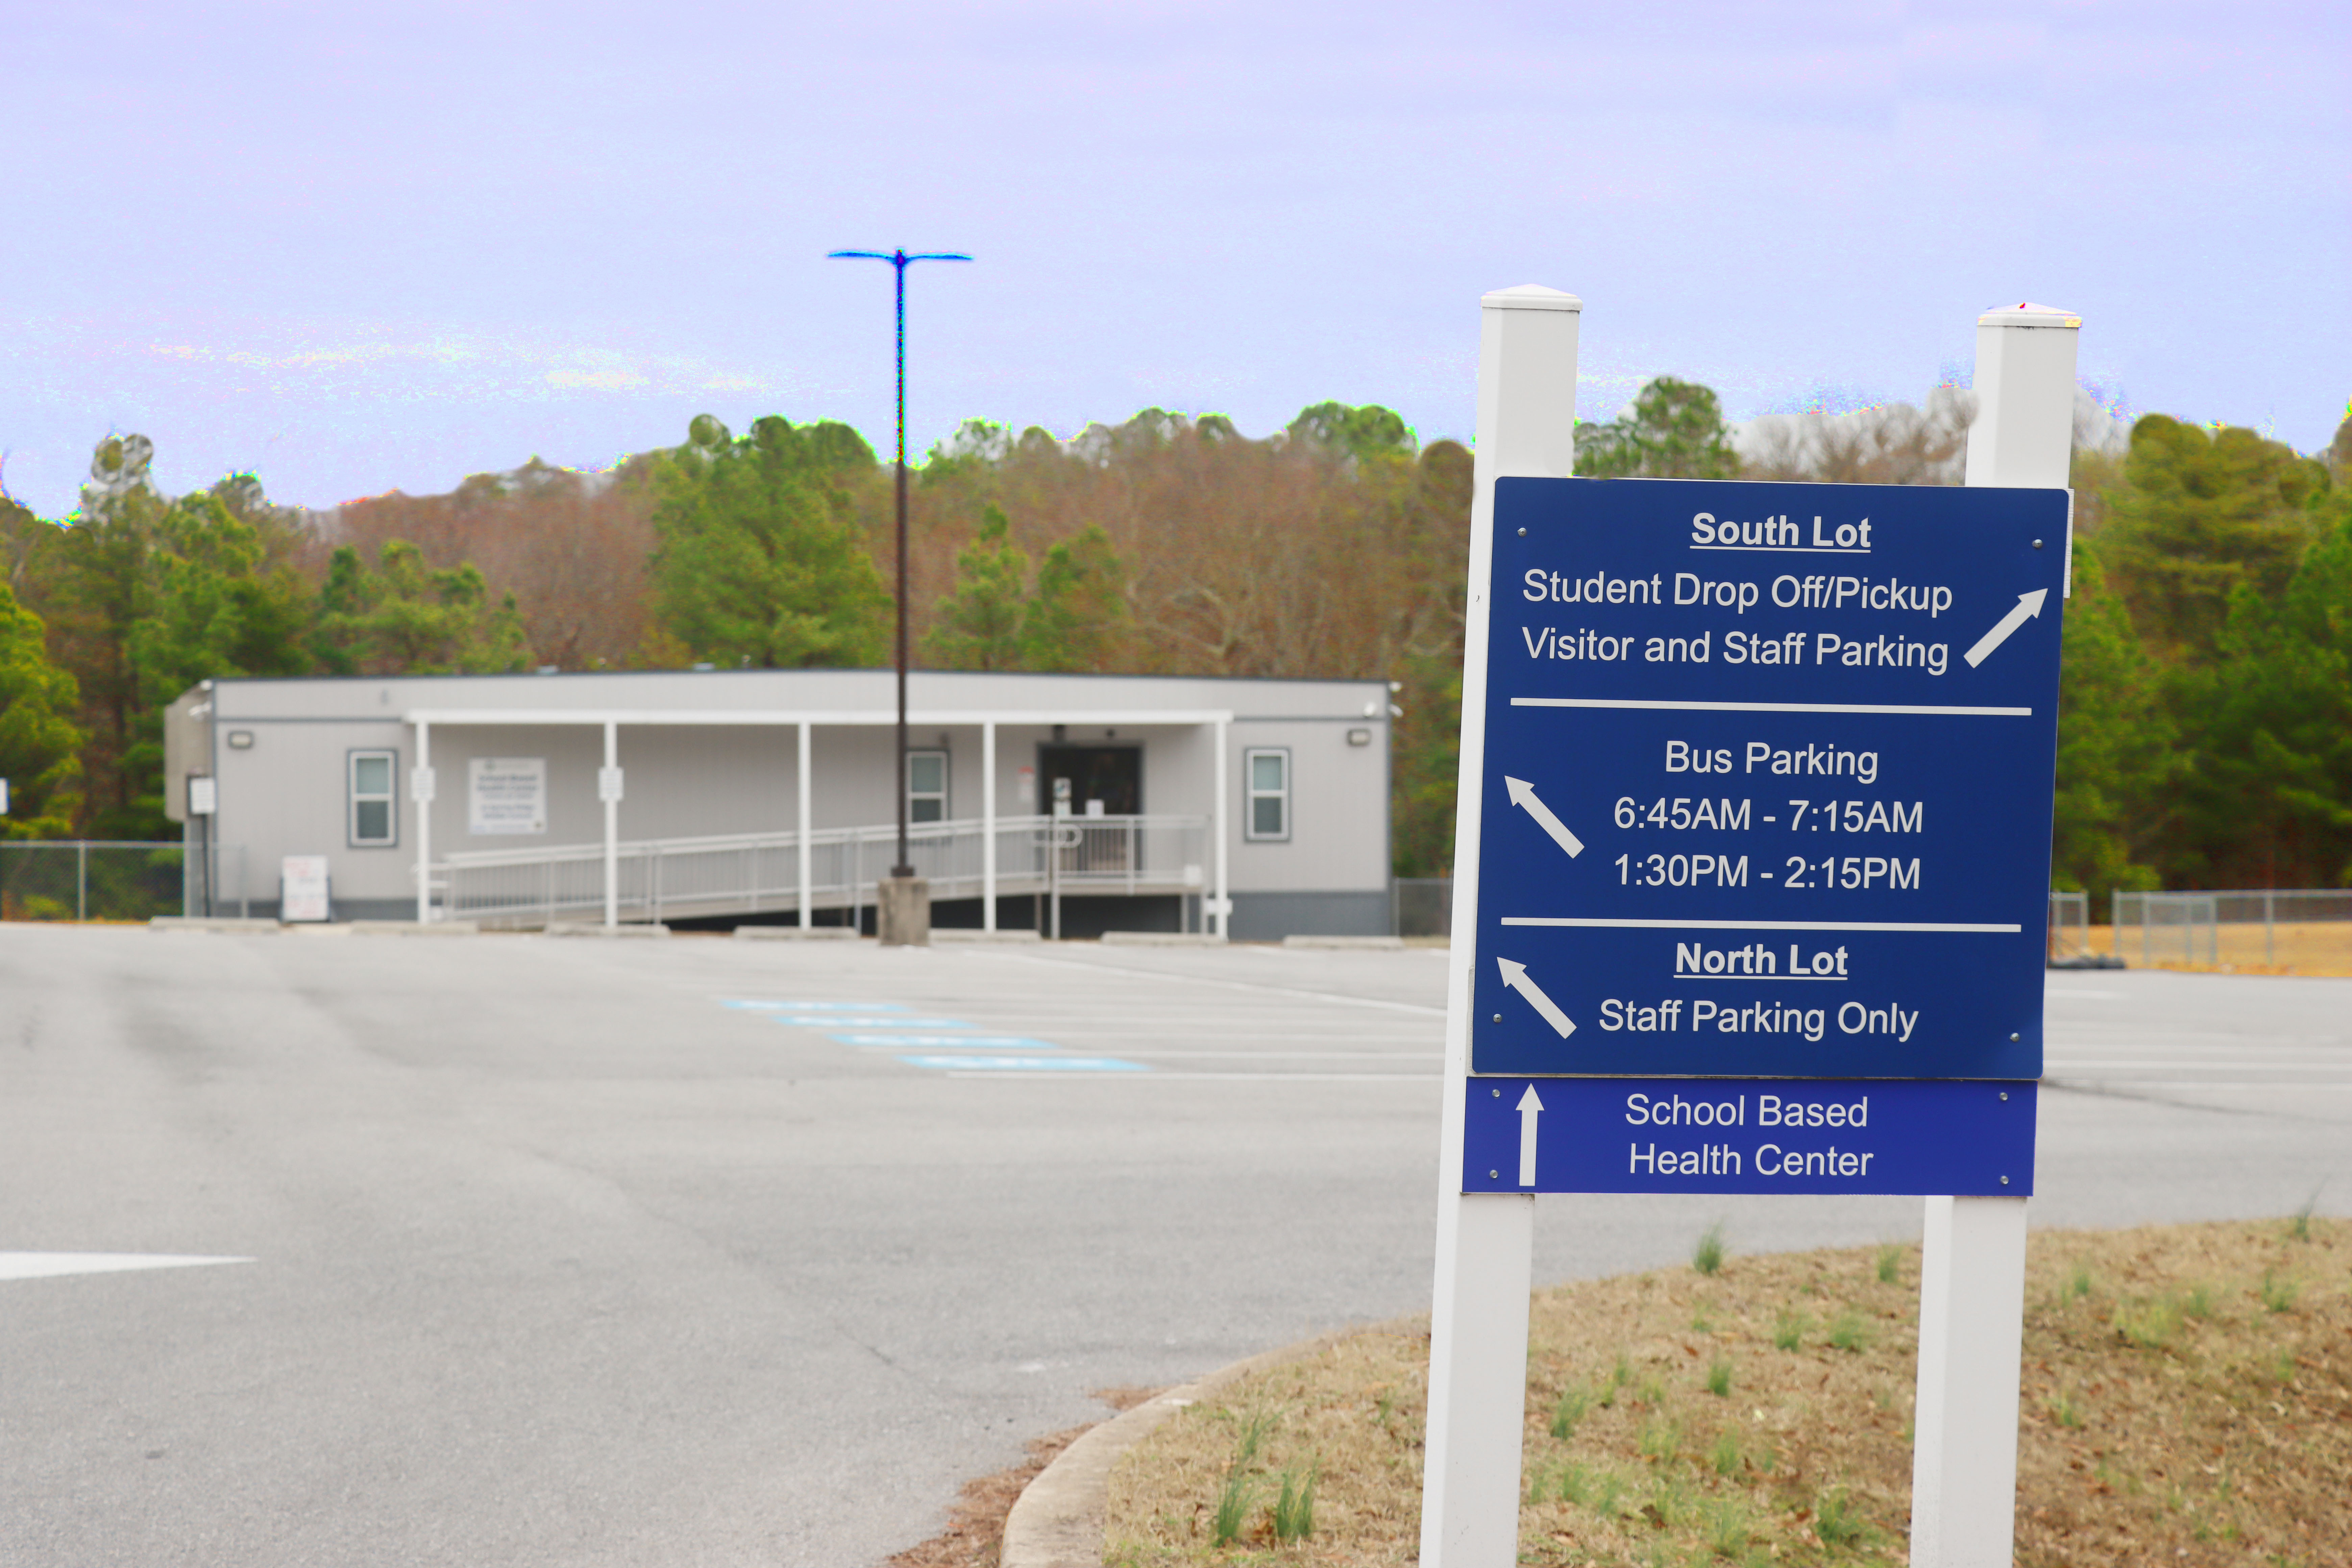 Spring Ridge Middle School Based Health Center with directional sign in parking lot